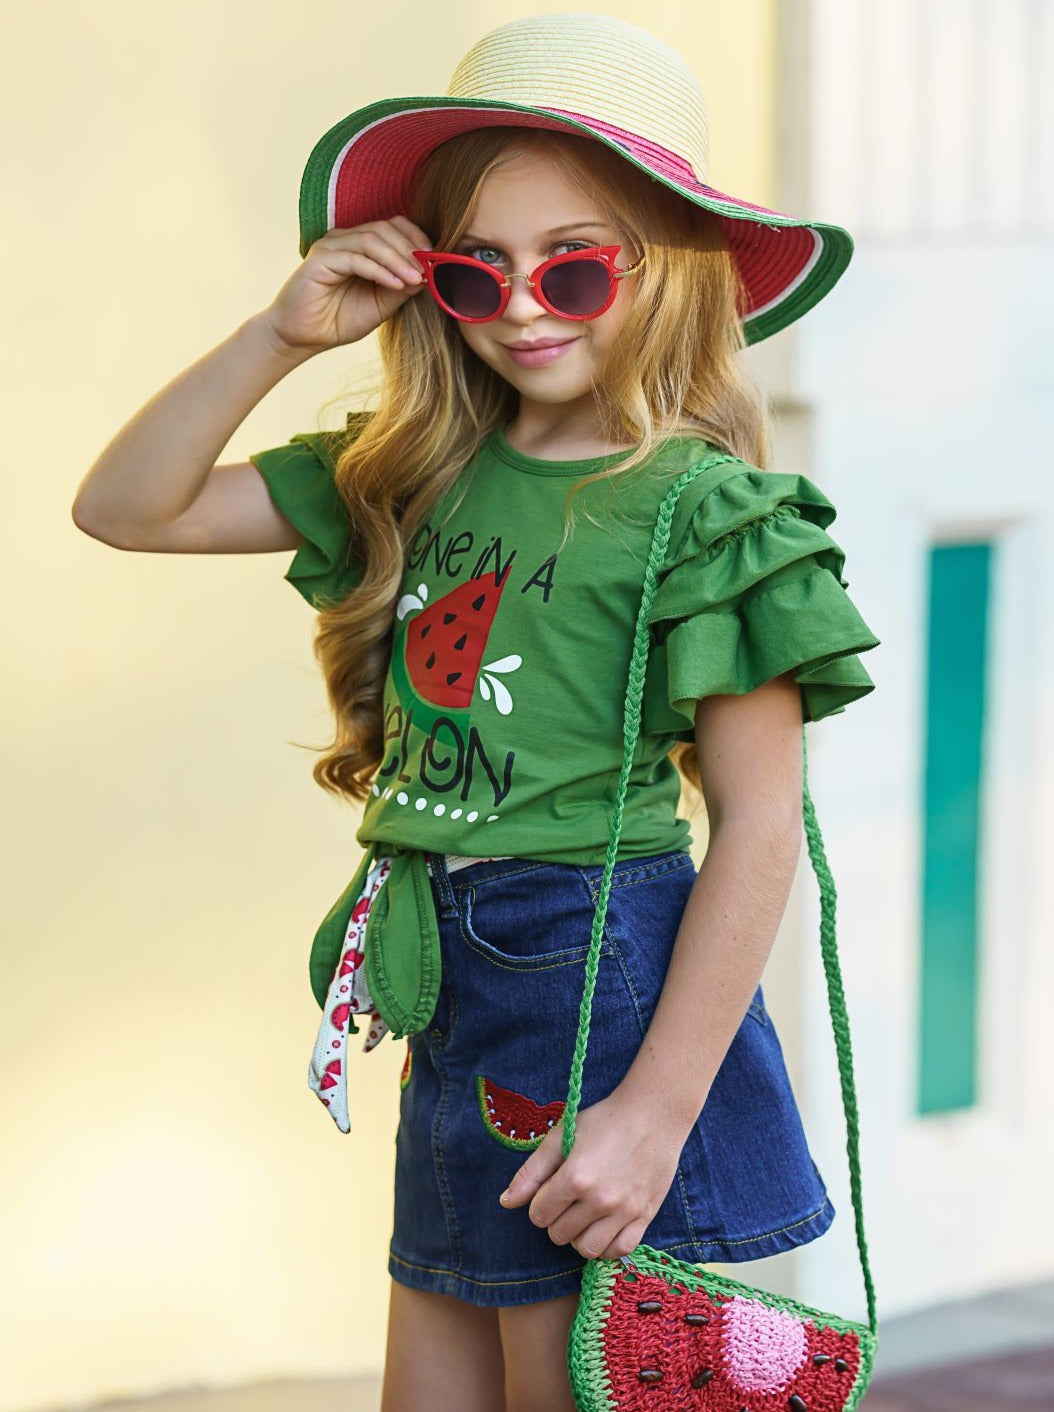 Girls Spring set features a green top with multi-layer ruffled sleeves, "One in a Melon" graphic print, and a denim skirt with watermelon applique and a sash belt